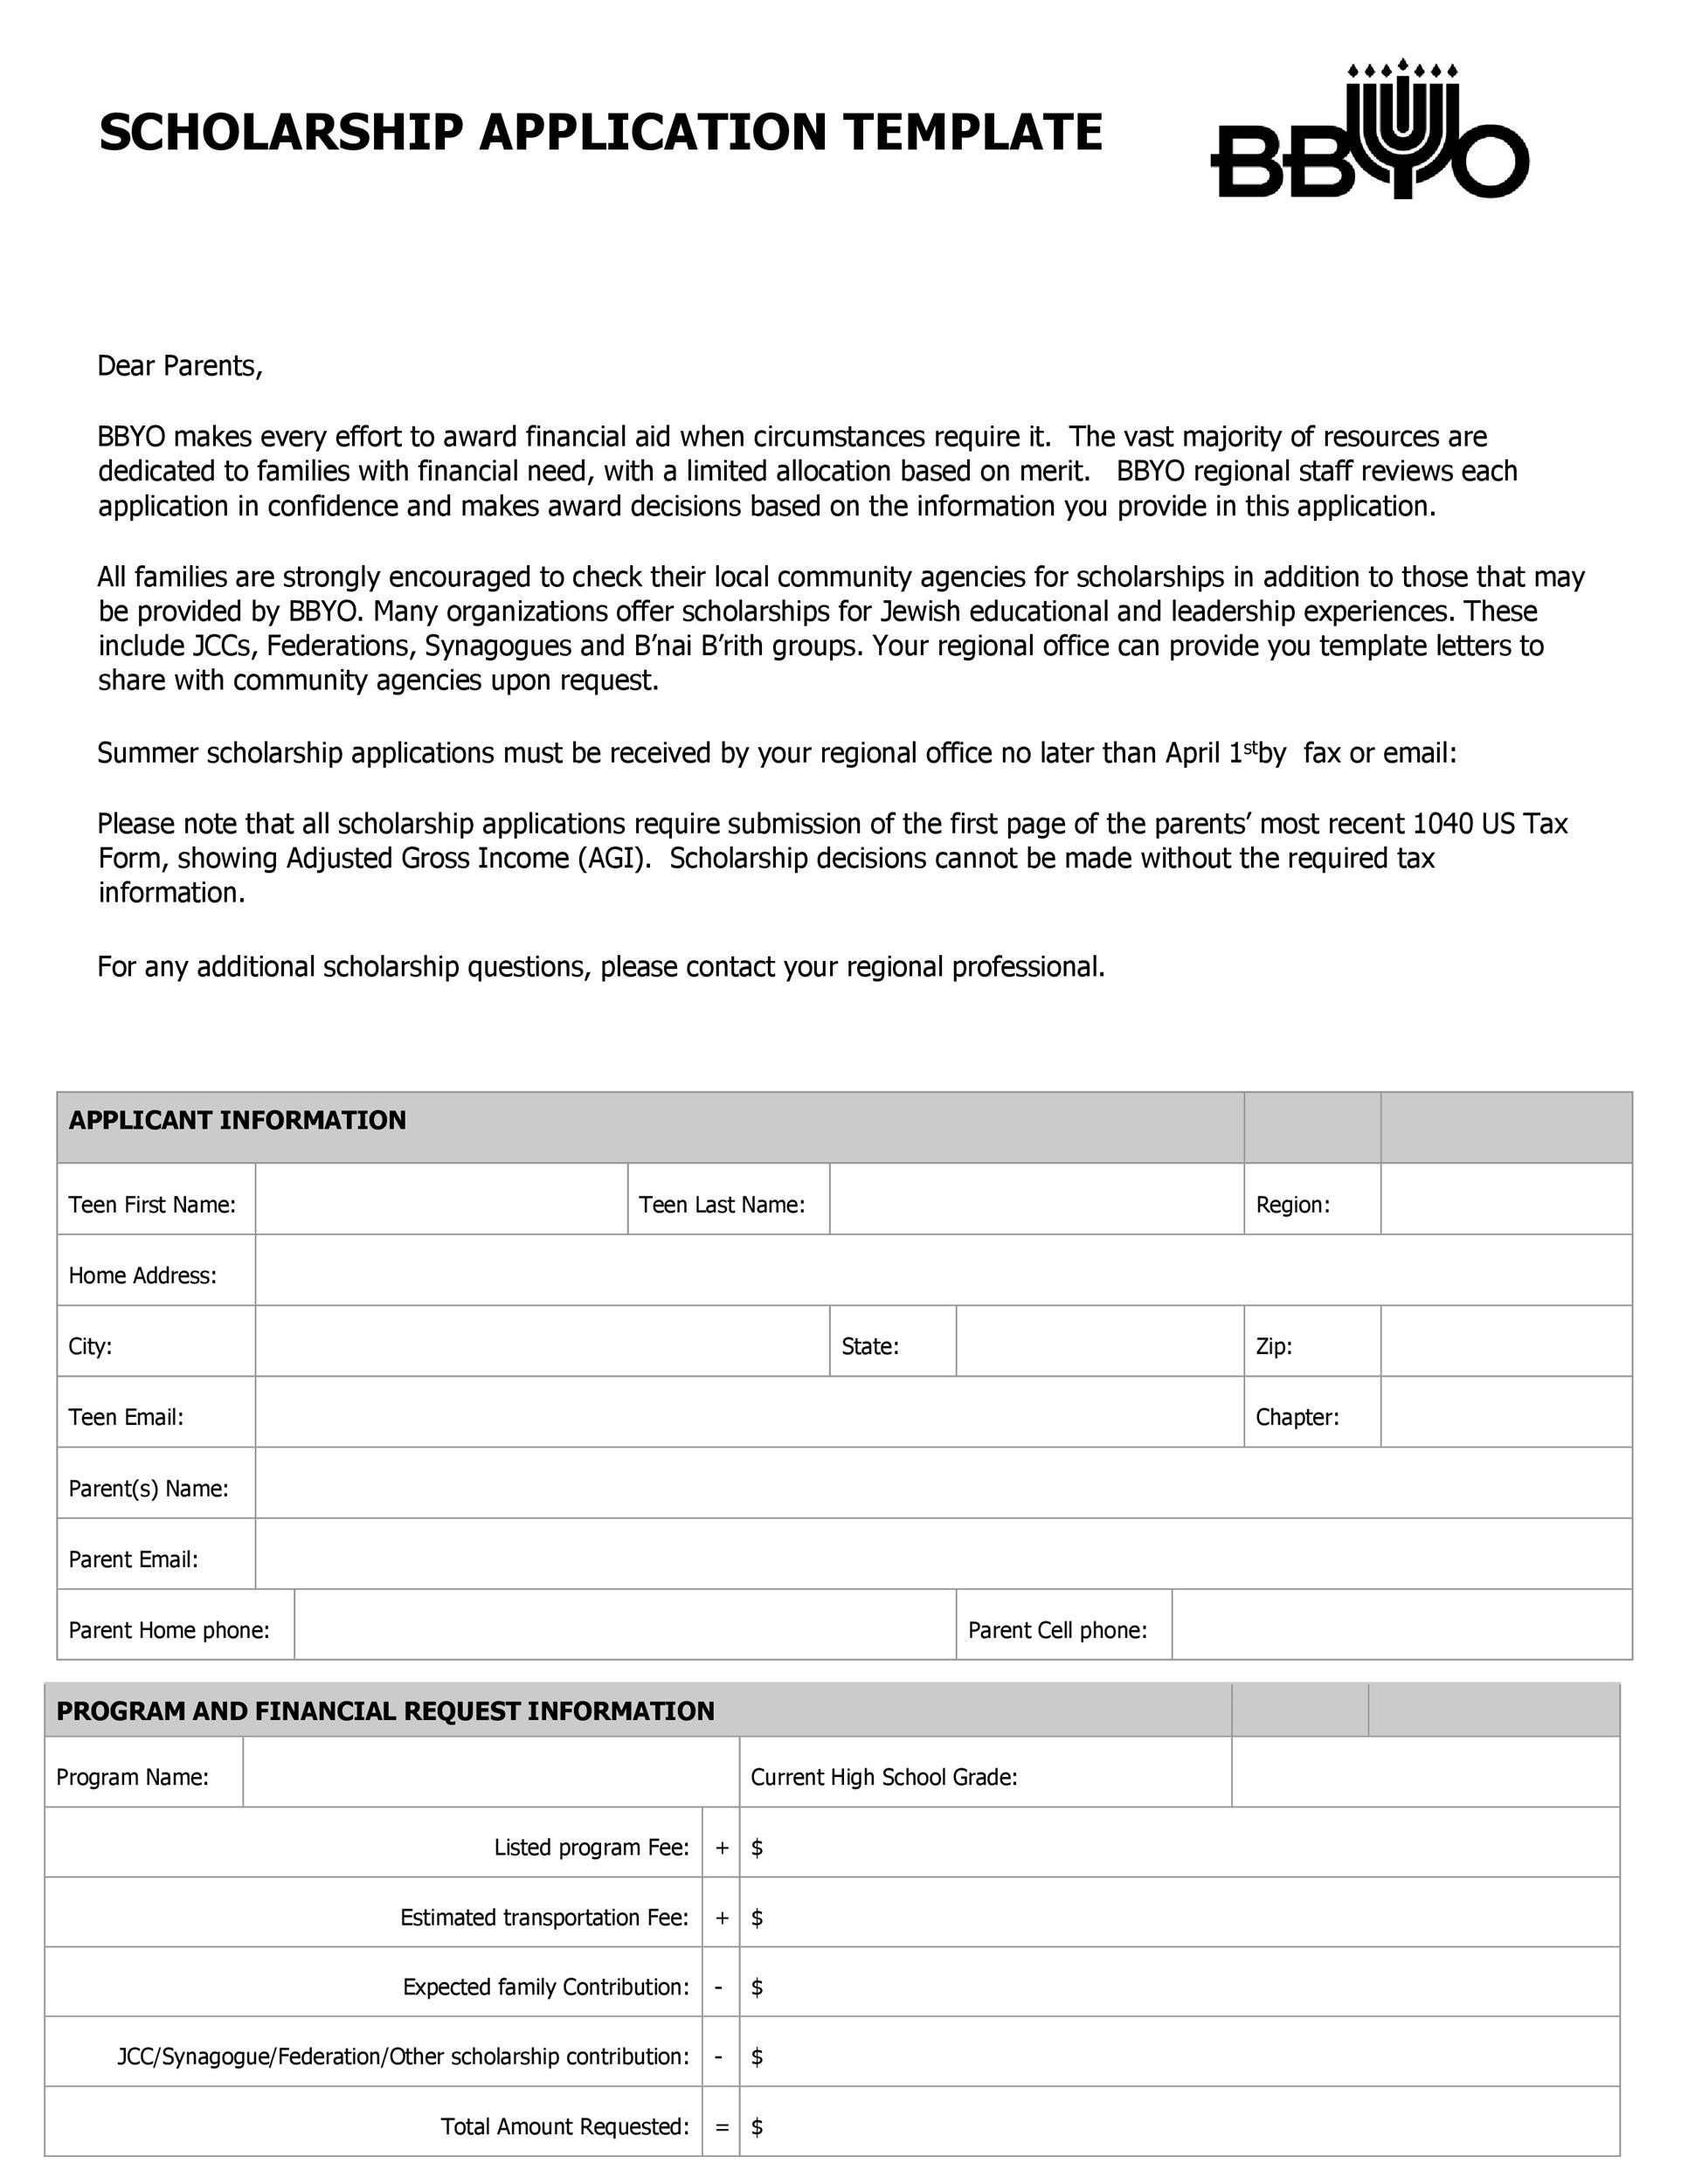 50 free scholarship application templates & forms